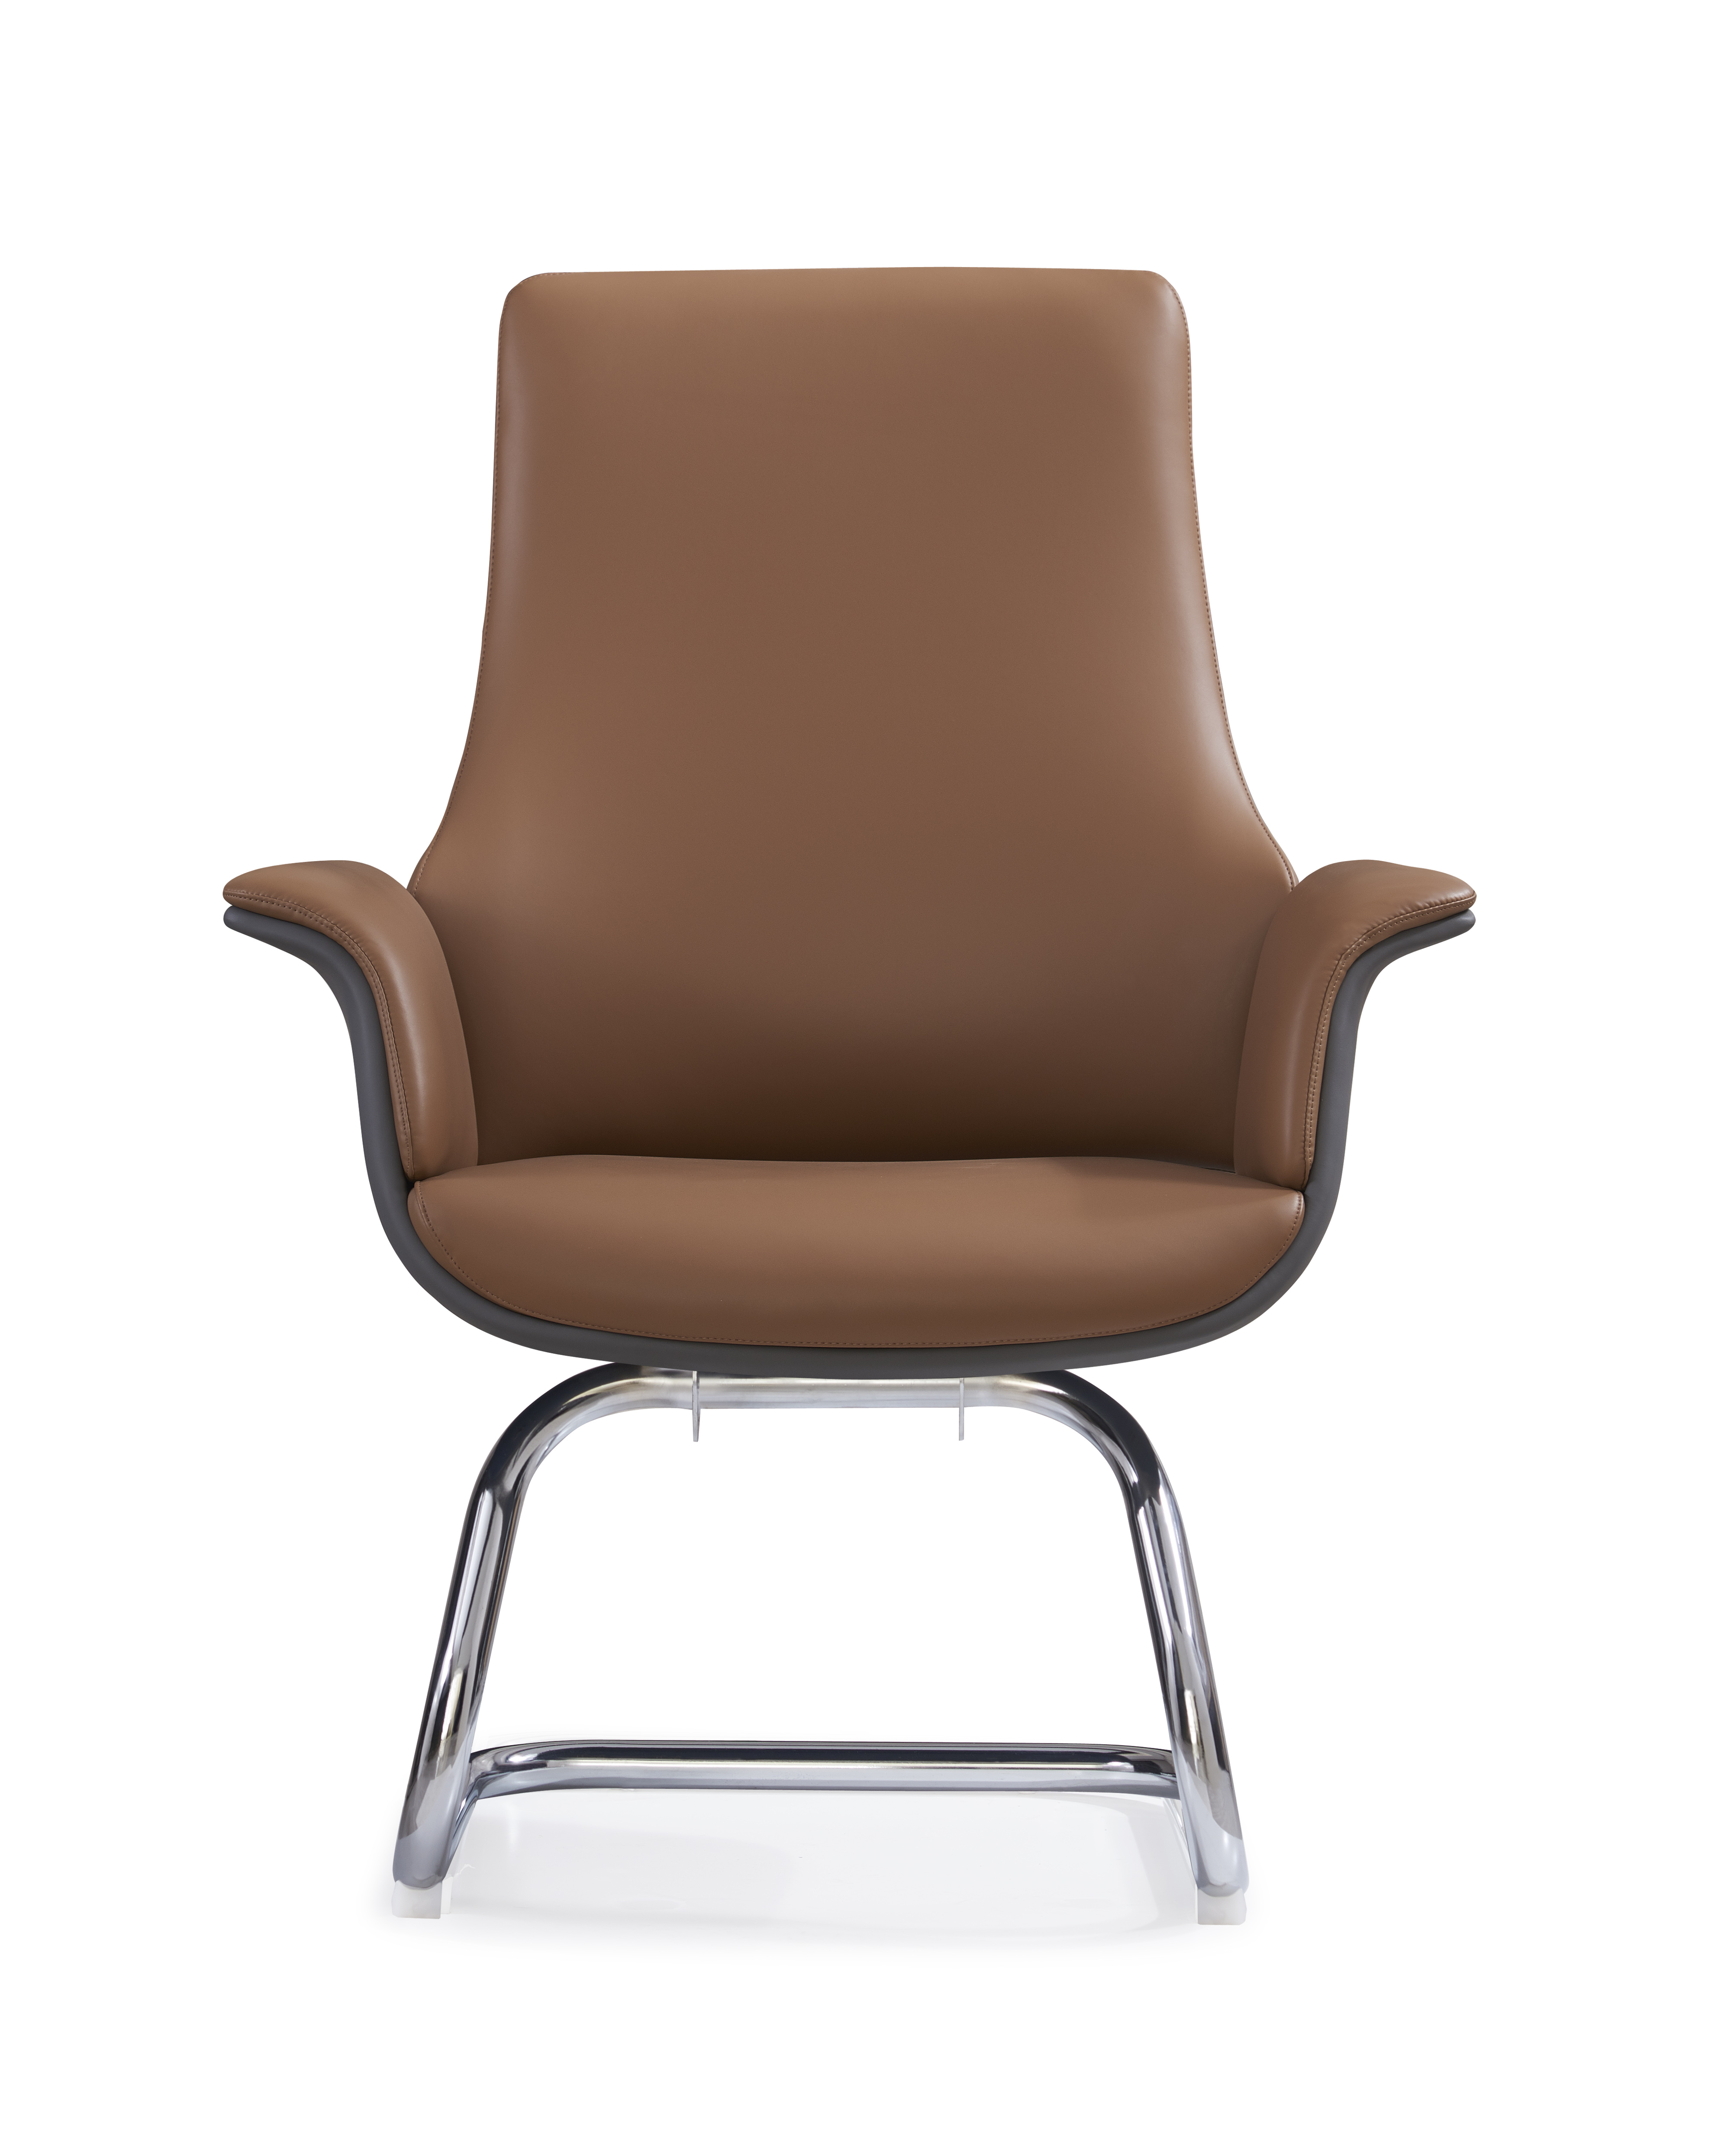 high quality leather office chair, office visitor chair price